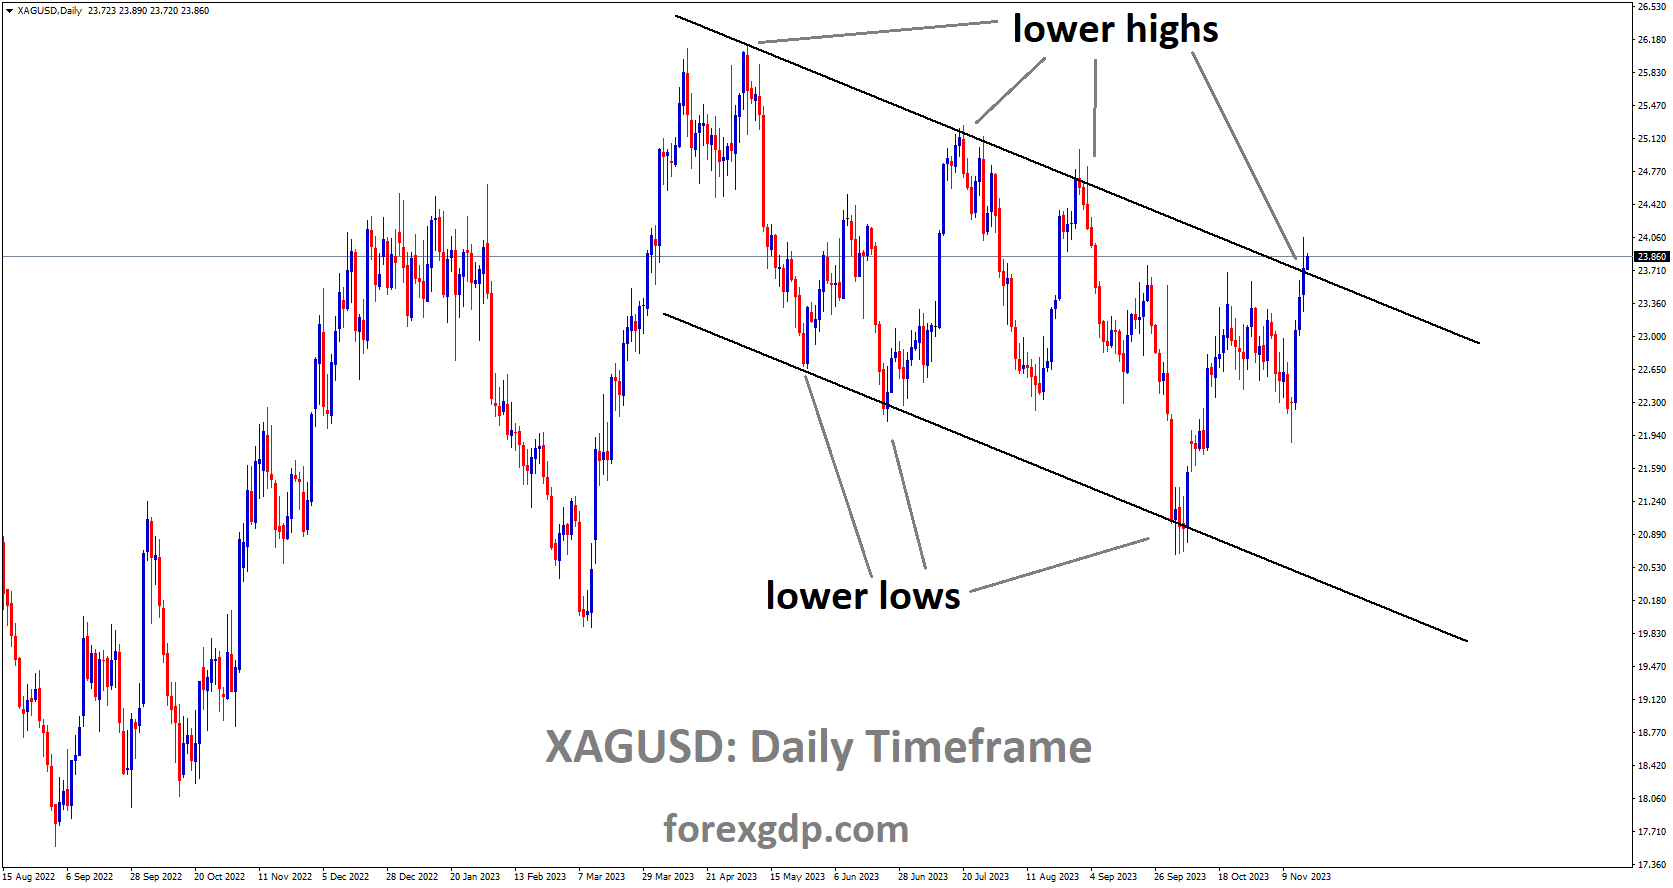 XAGUSD is moving in a Descending channel and the market has reached the lower high area of the channel